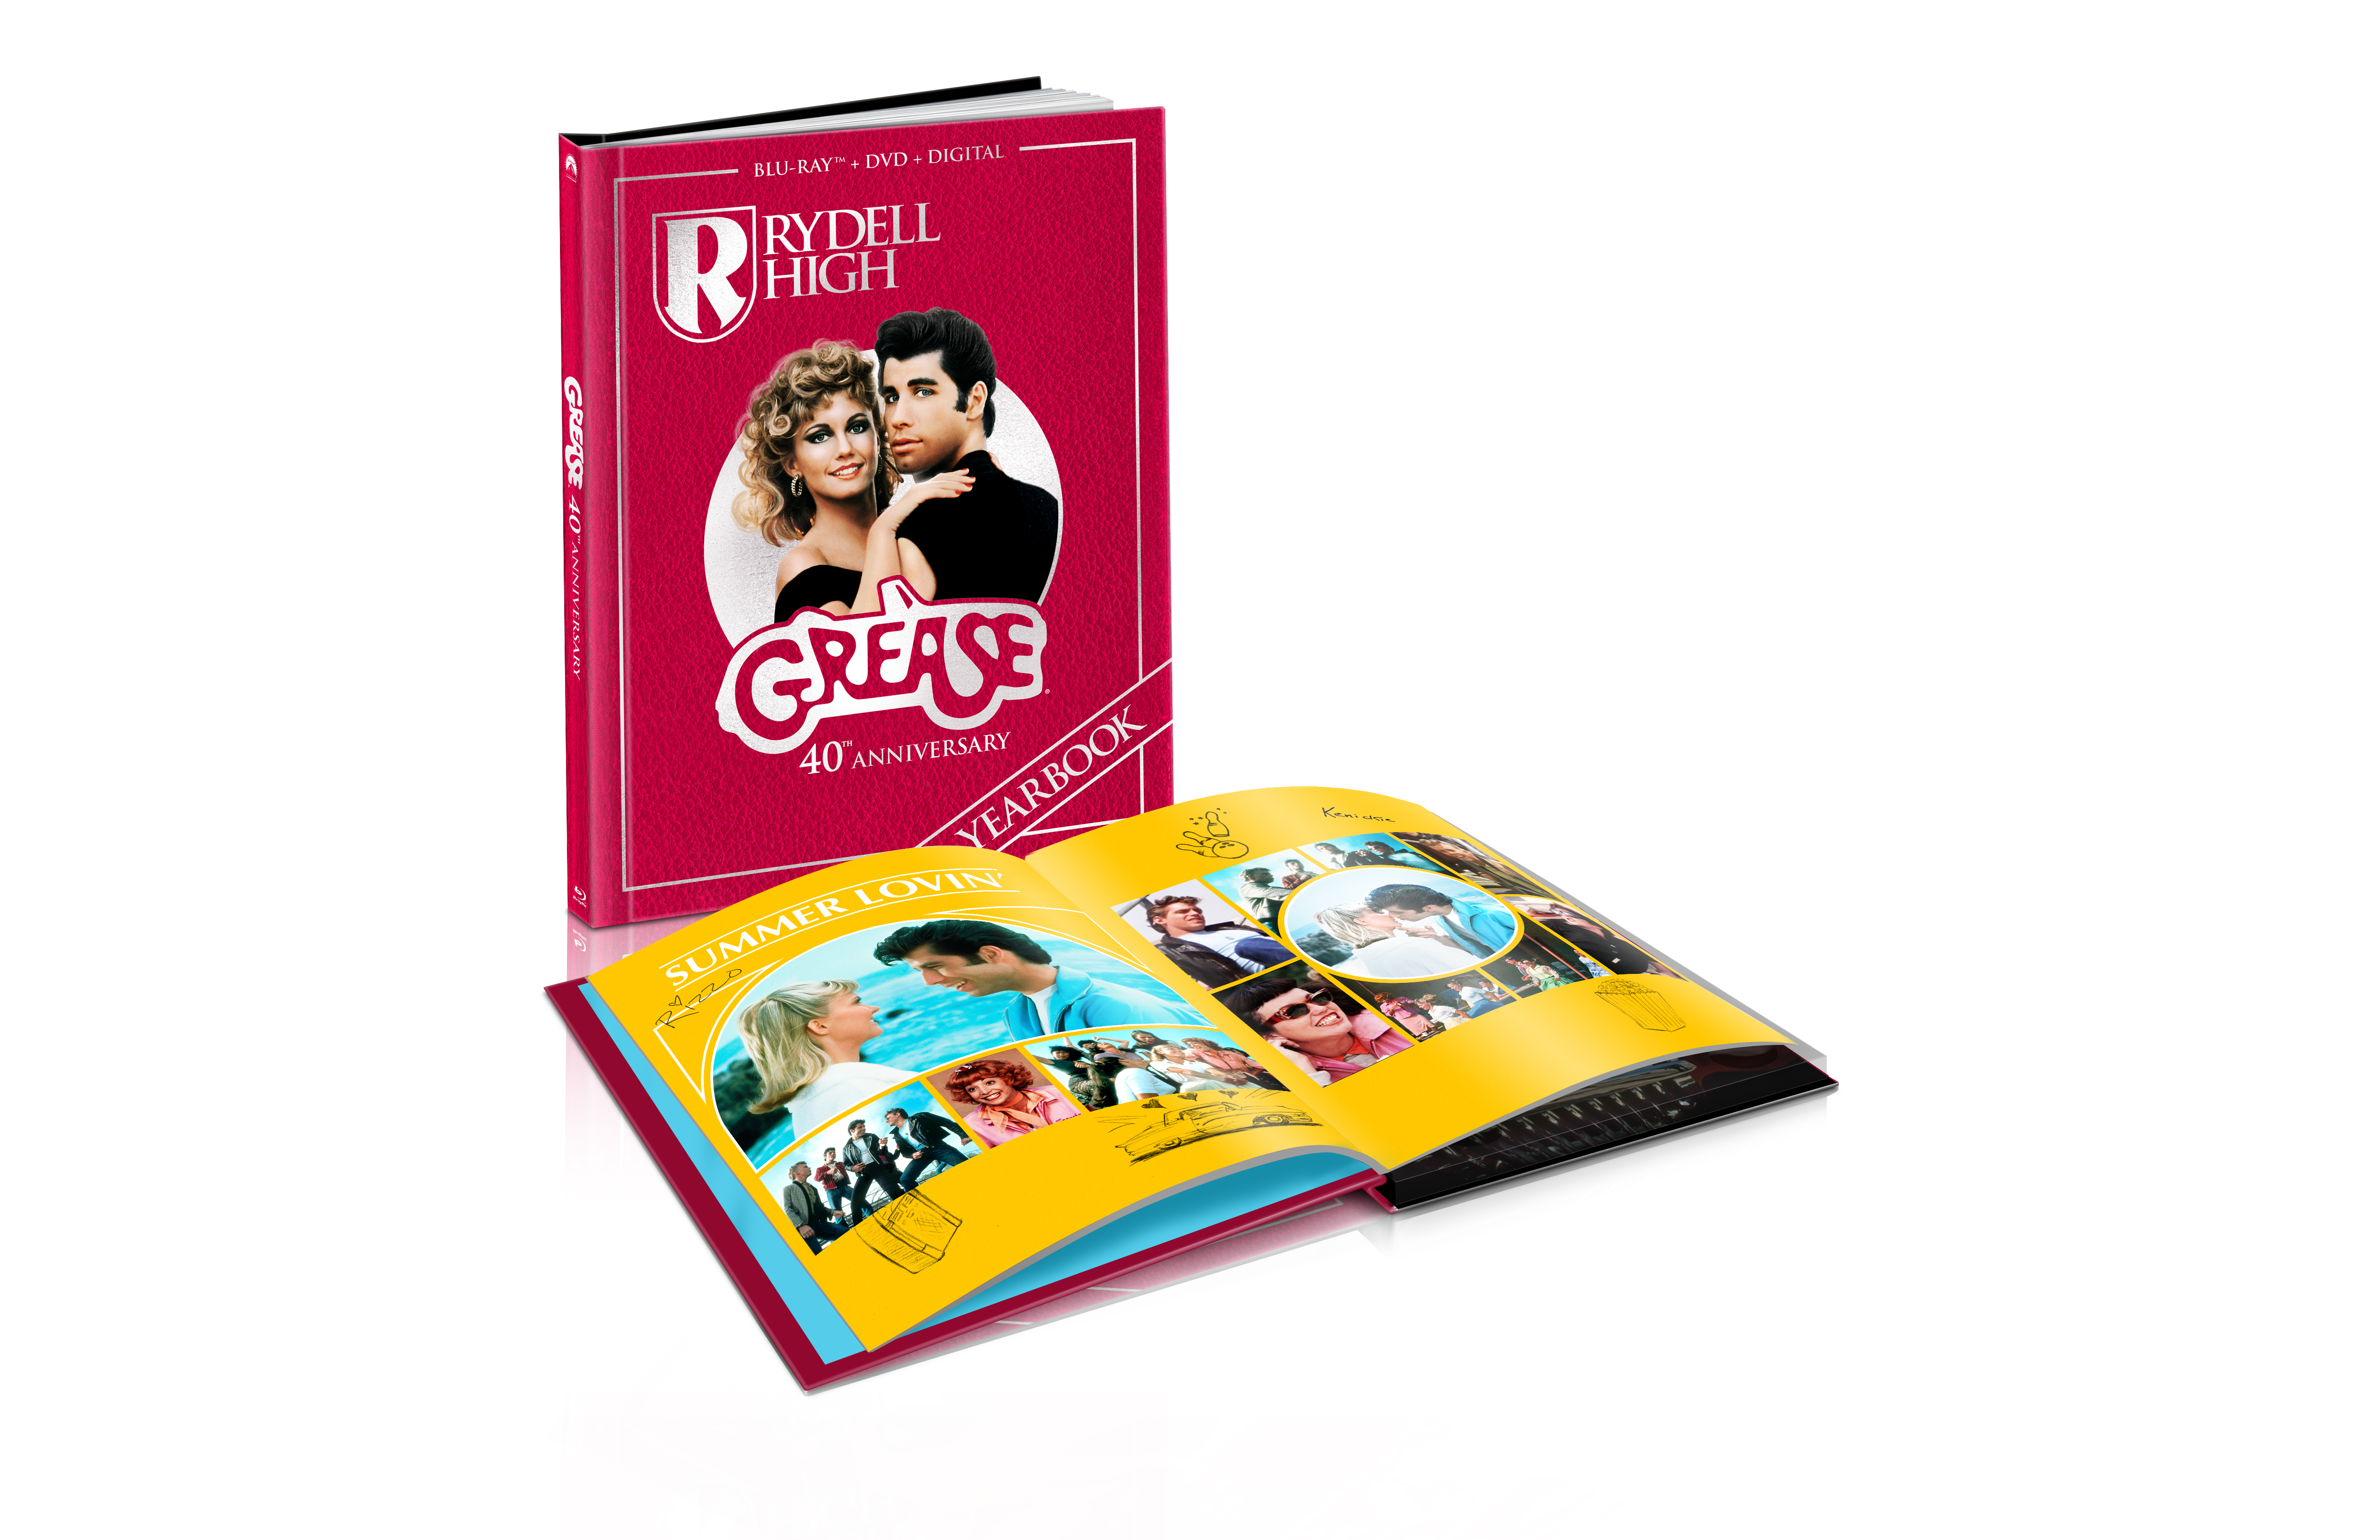 Grease: 40th Anniversary Edition Blu-Ray Combo Pack with Yearbook (Paramount Home Entertainment)